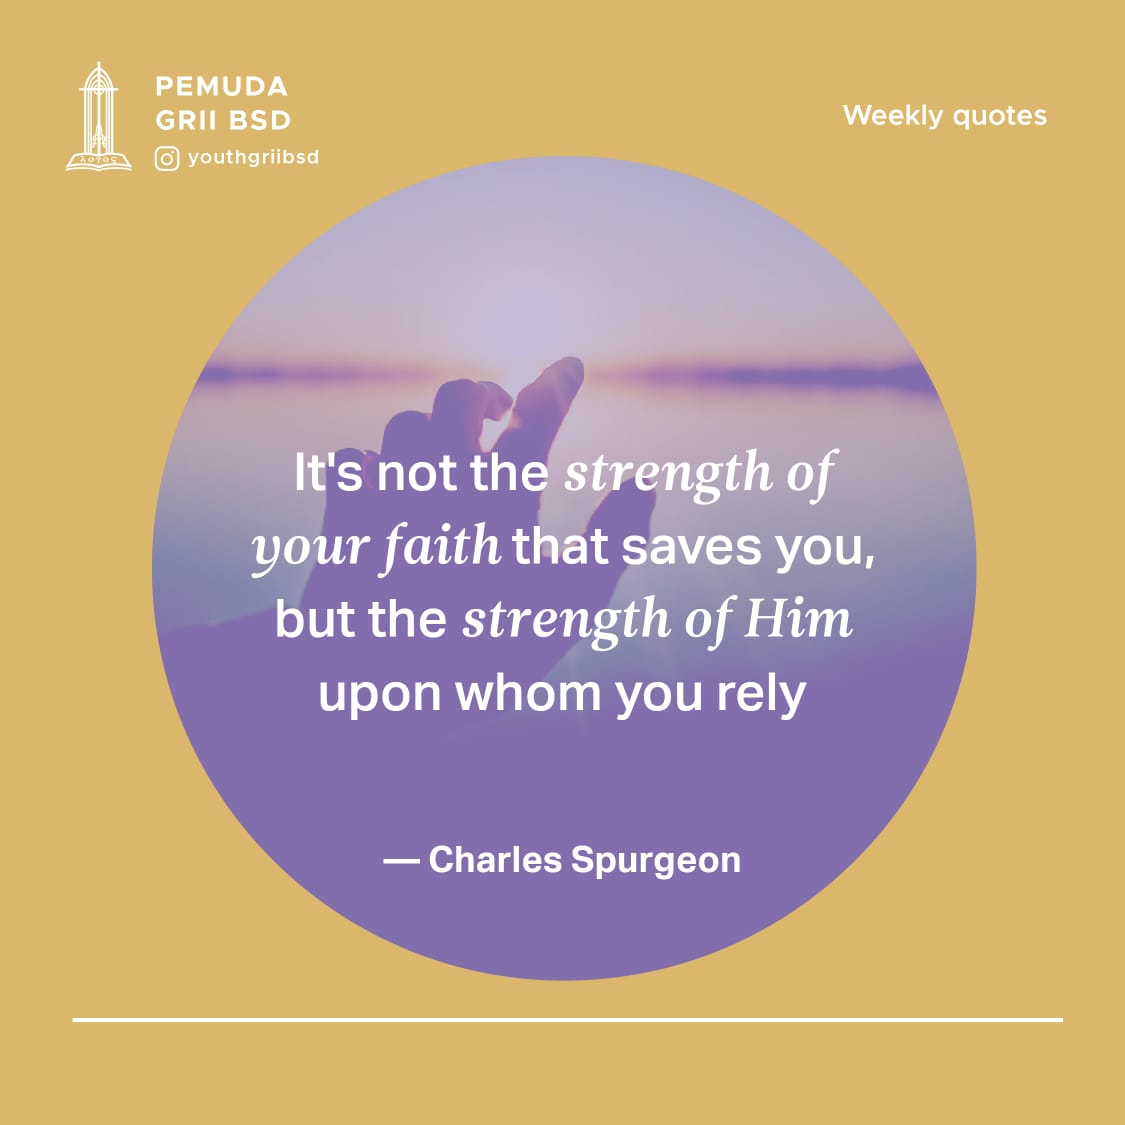 It's not the strength of your faith that saves you, but the strength of Him upon whom you rely.